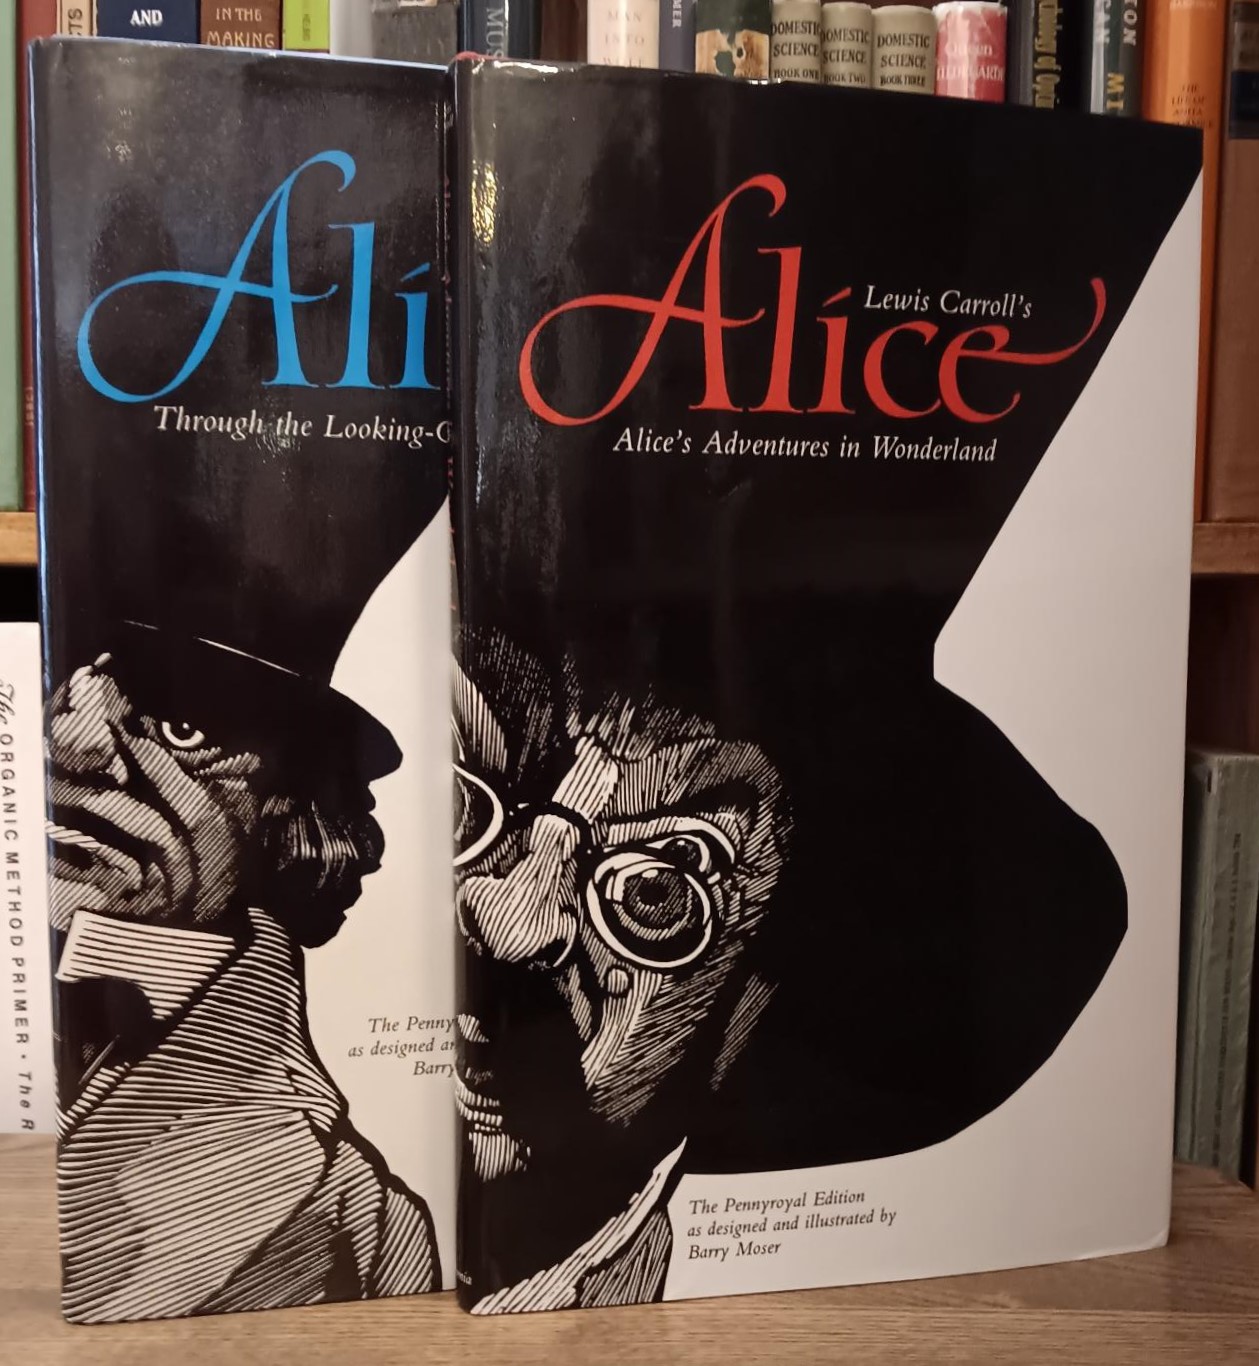 Alice's Adventures in Wonderland & Through the Looking-Glass, and What Alice Found There (2 Volumes)